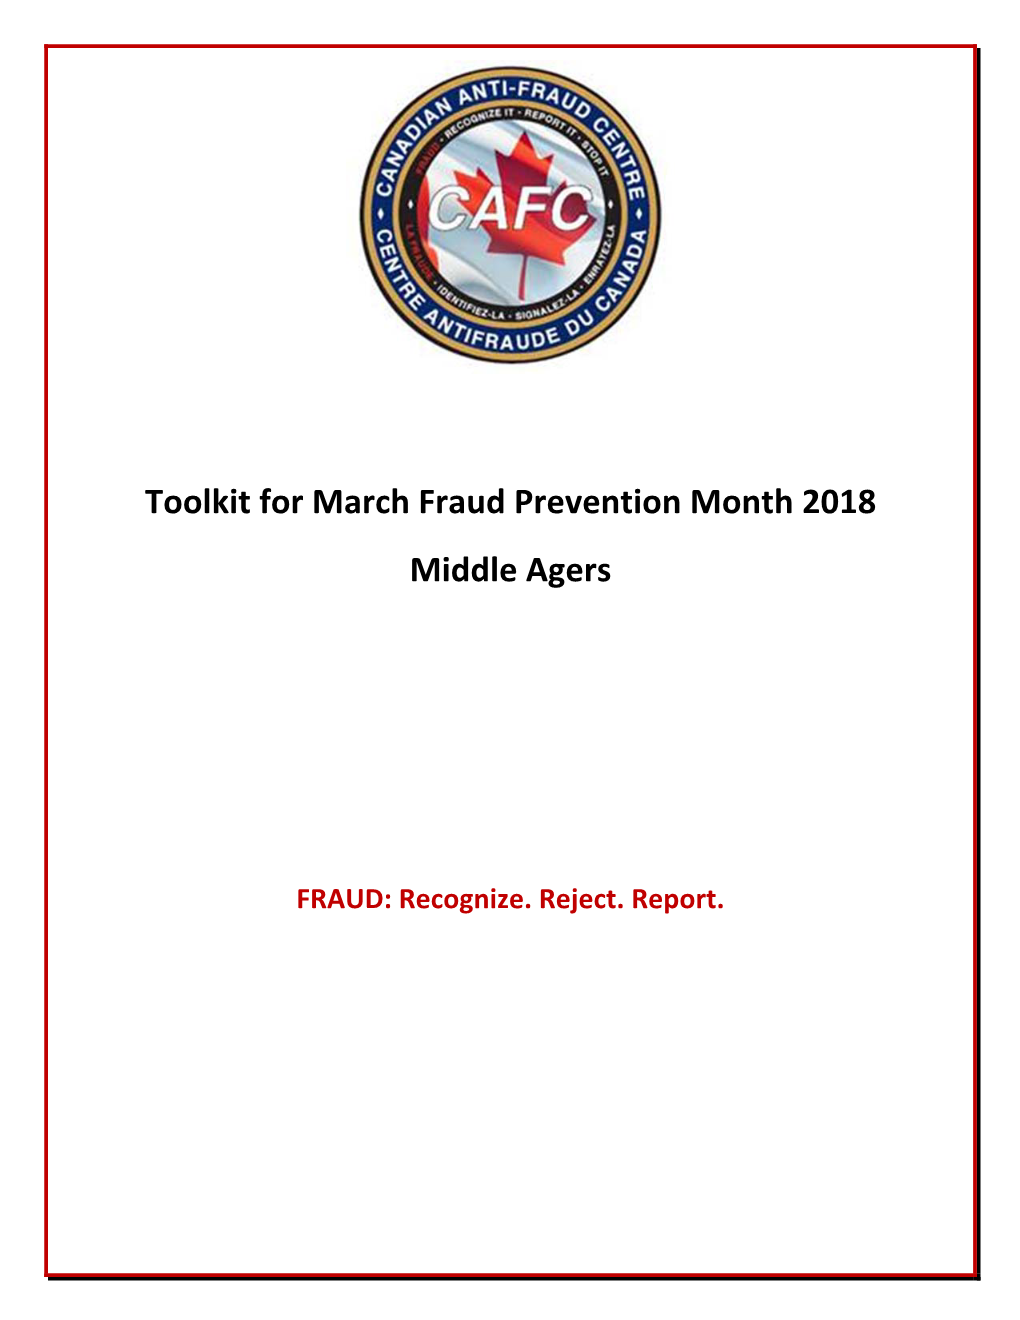 Toolkit for March Fraud Prevention Month 2018 Middle Agers